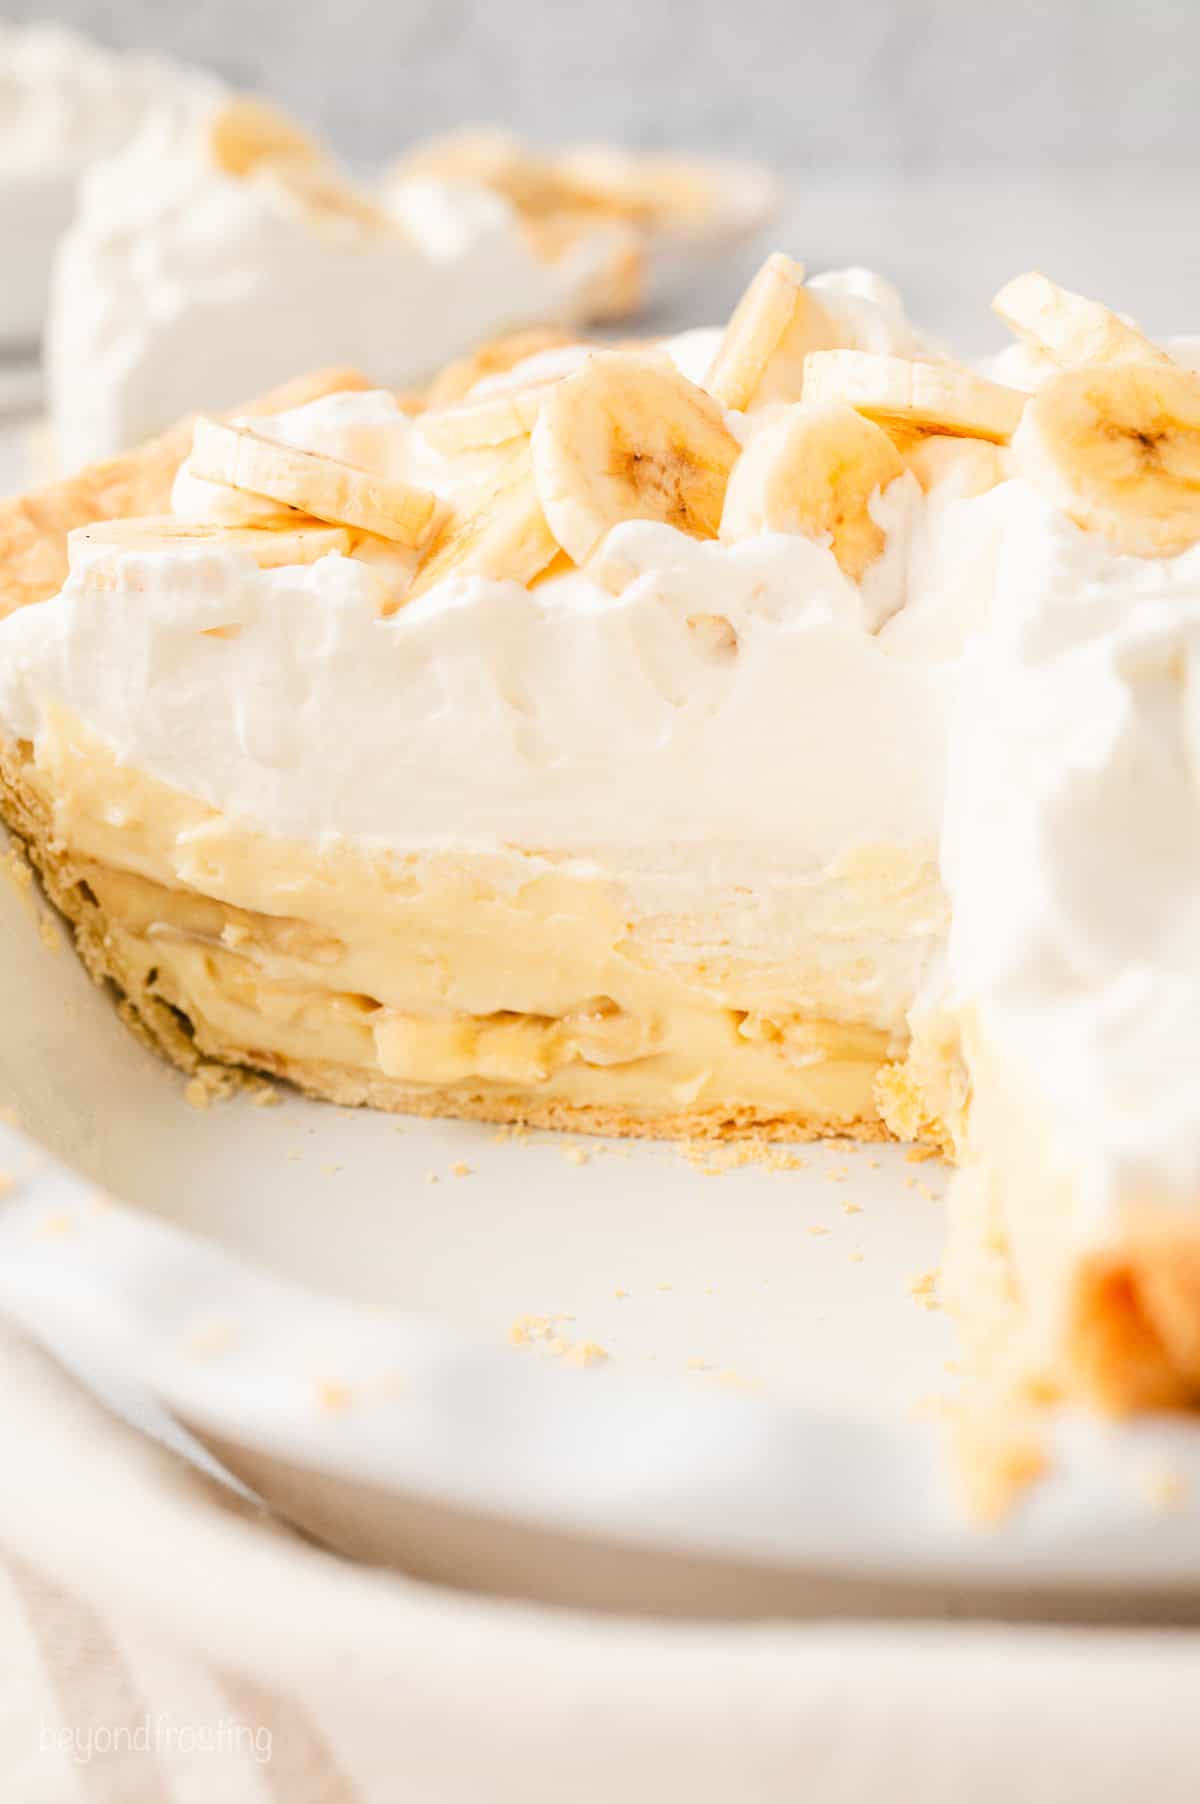 Banana cream pie topped with banana slices in a pie plate, with a slice missing.